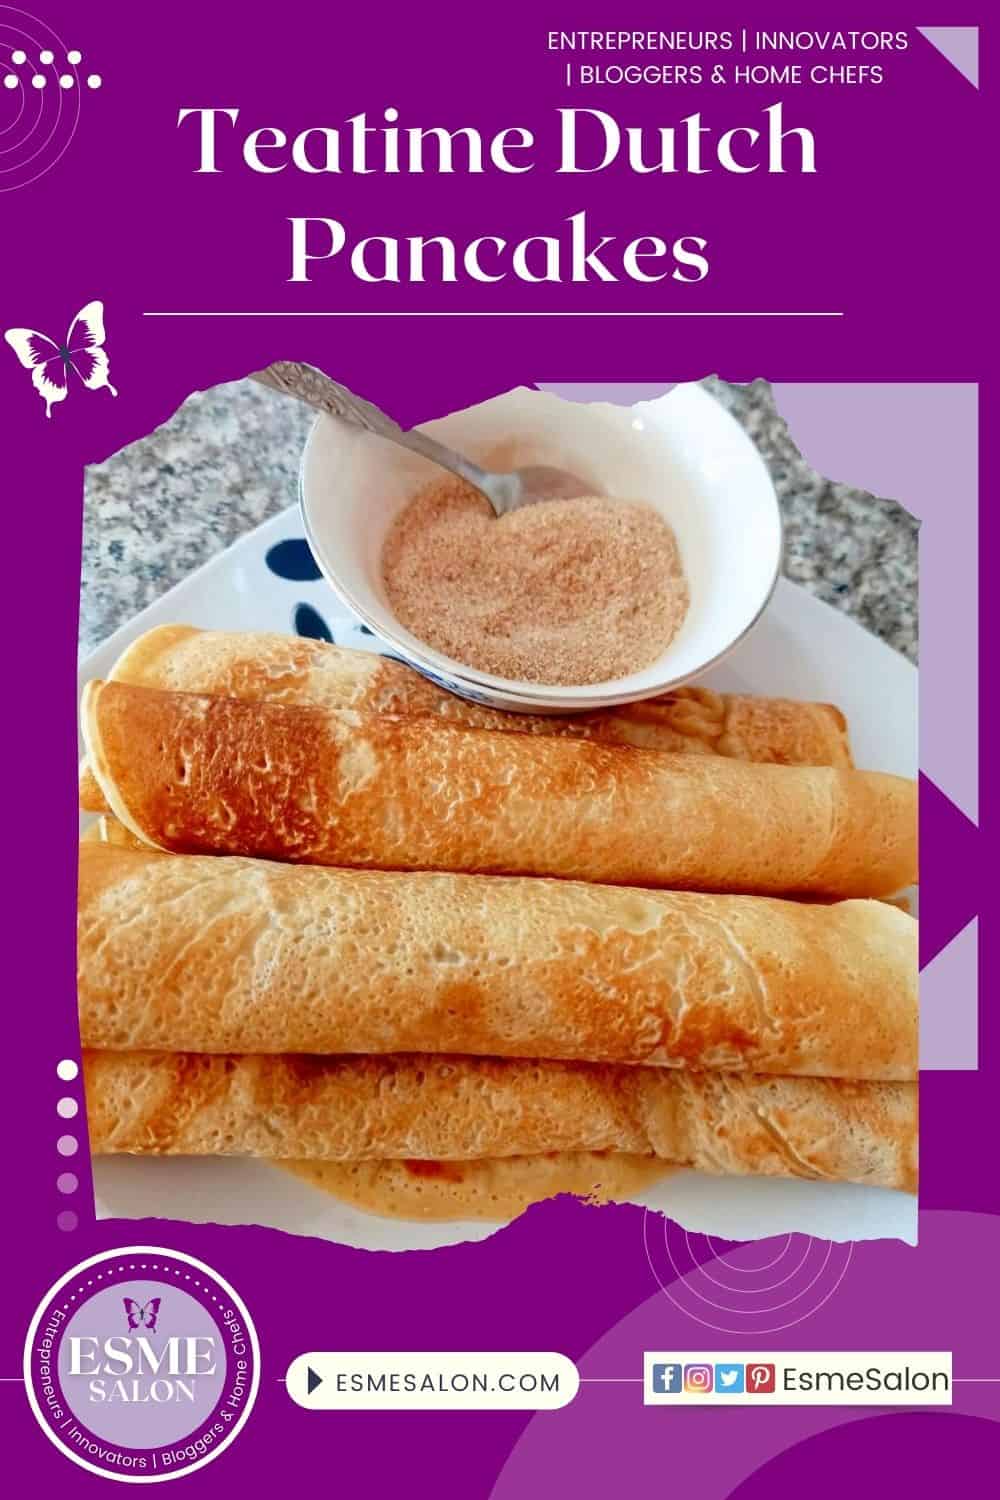 An image with a white place and 5 rolled up Teatime Dutch Pancakes with a bowl of cinnamon sugar on the side